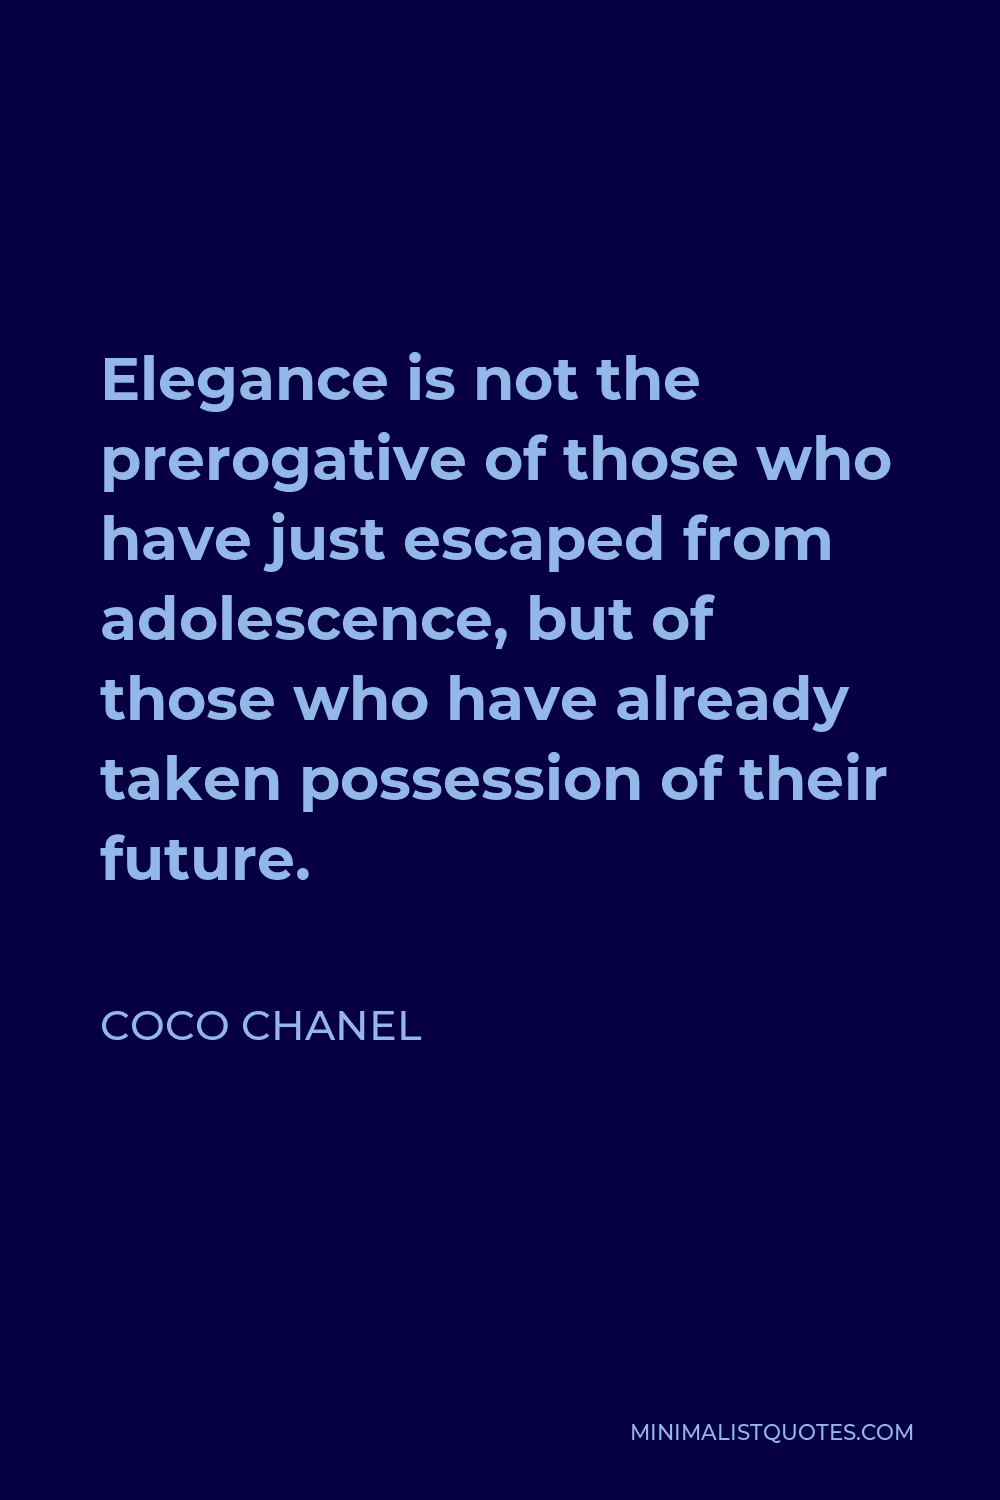 Coco Chanel Quote - Elegance is not the prerogative of those who have just escaped from adolescence, but of those who have already taken possession of their future.